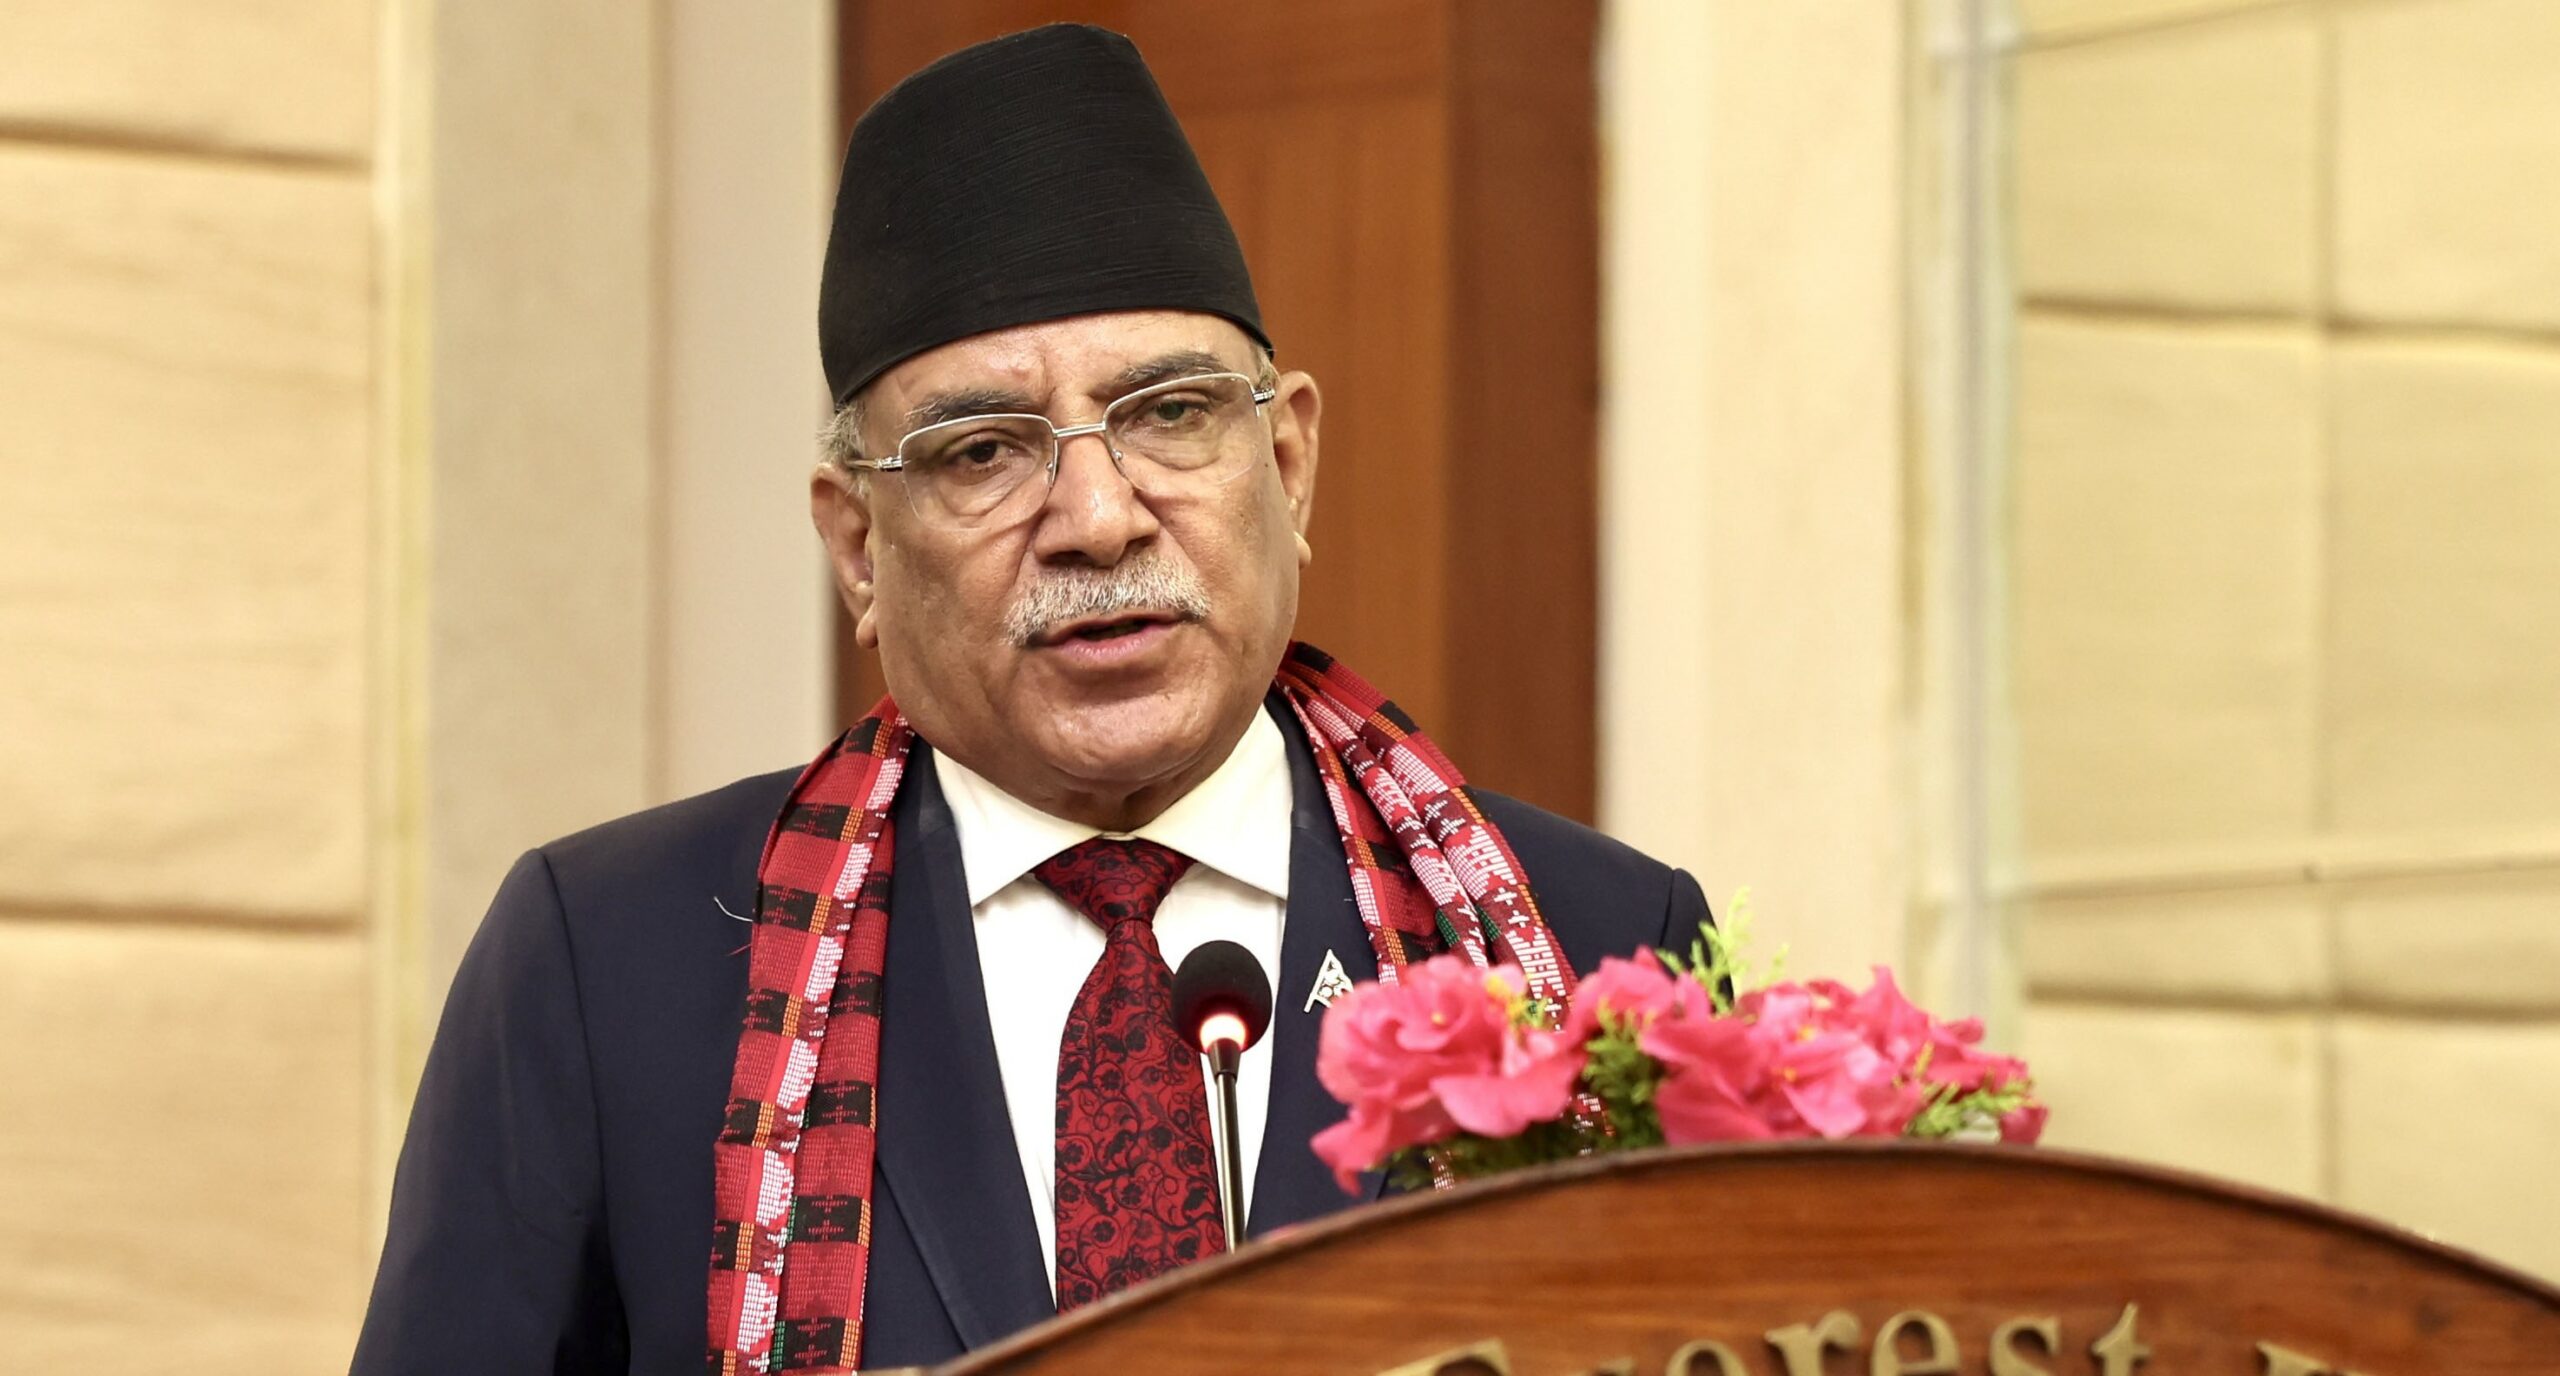 PM Dahal pledges to address concerns of conflict victims